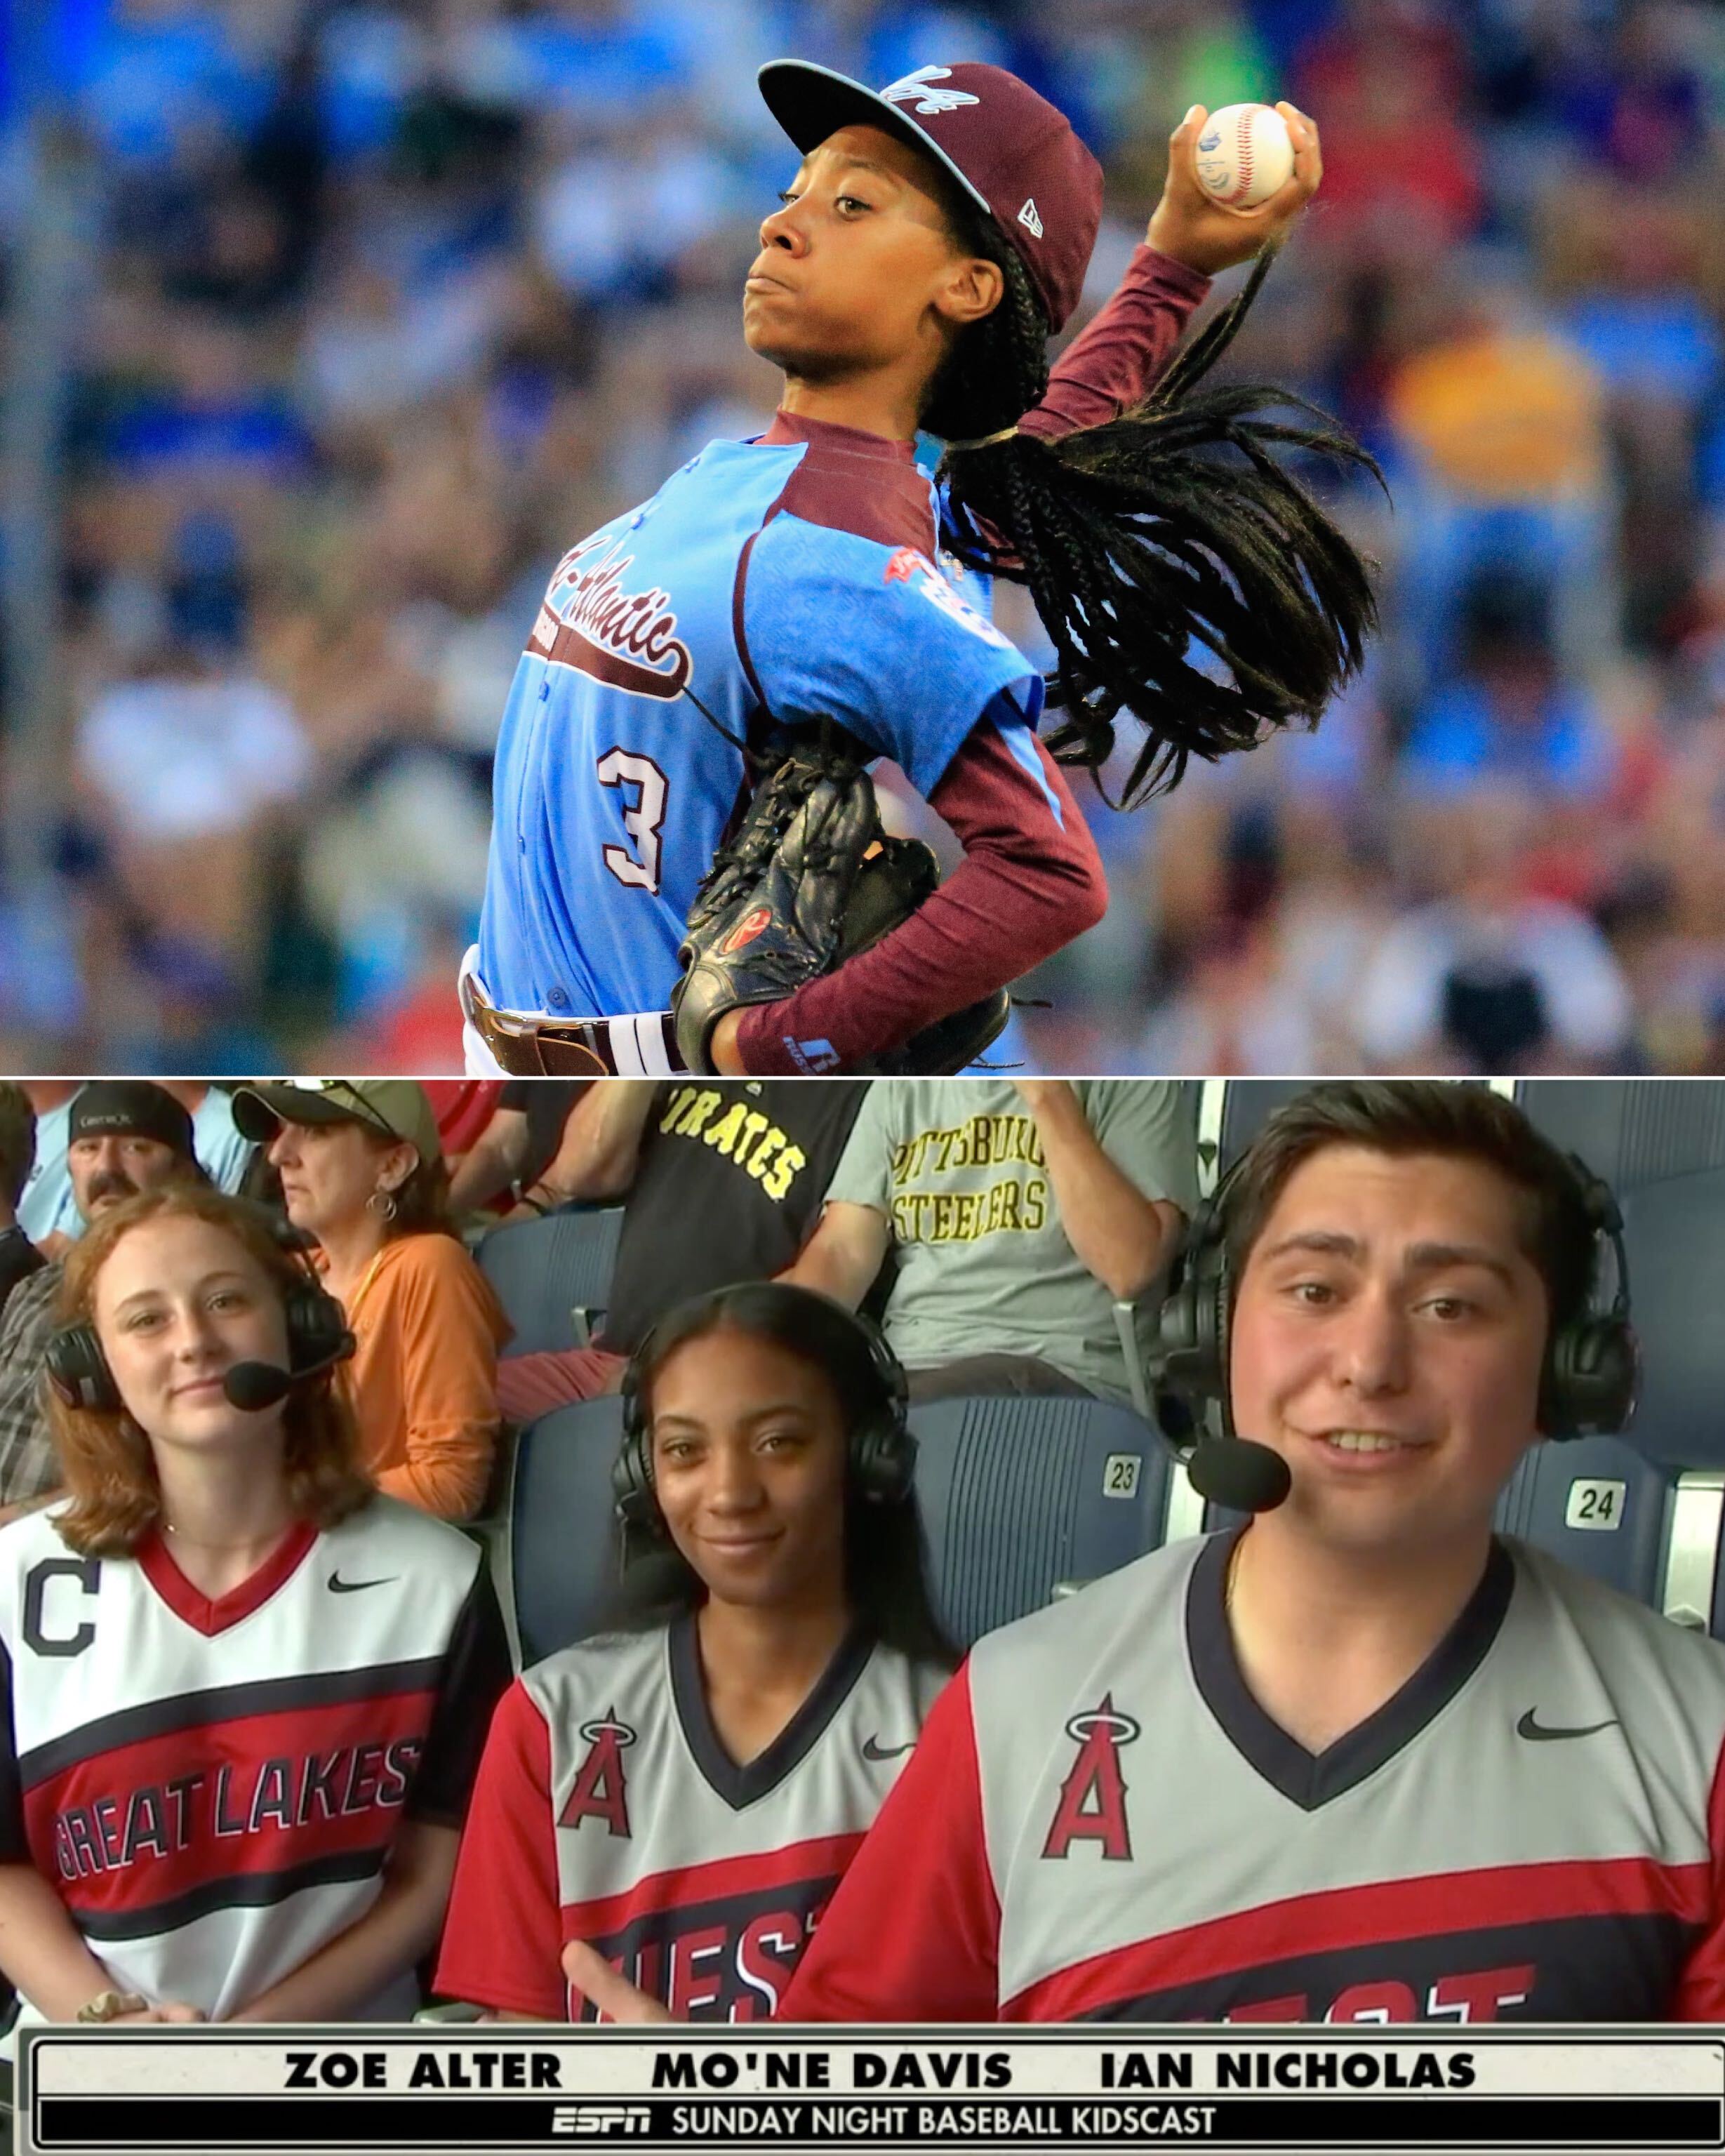 ESPN on X: In 2014, Mo'ne Davis became a superstar at the Little